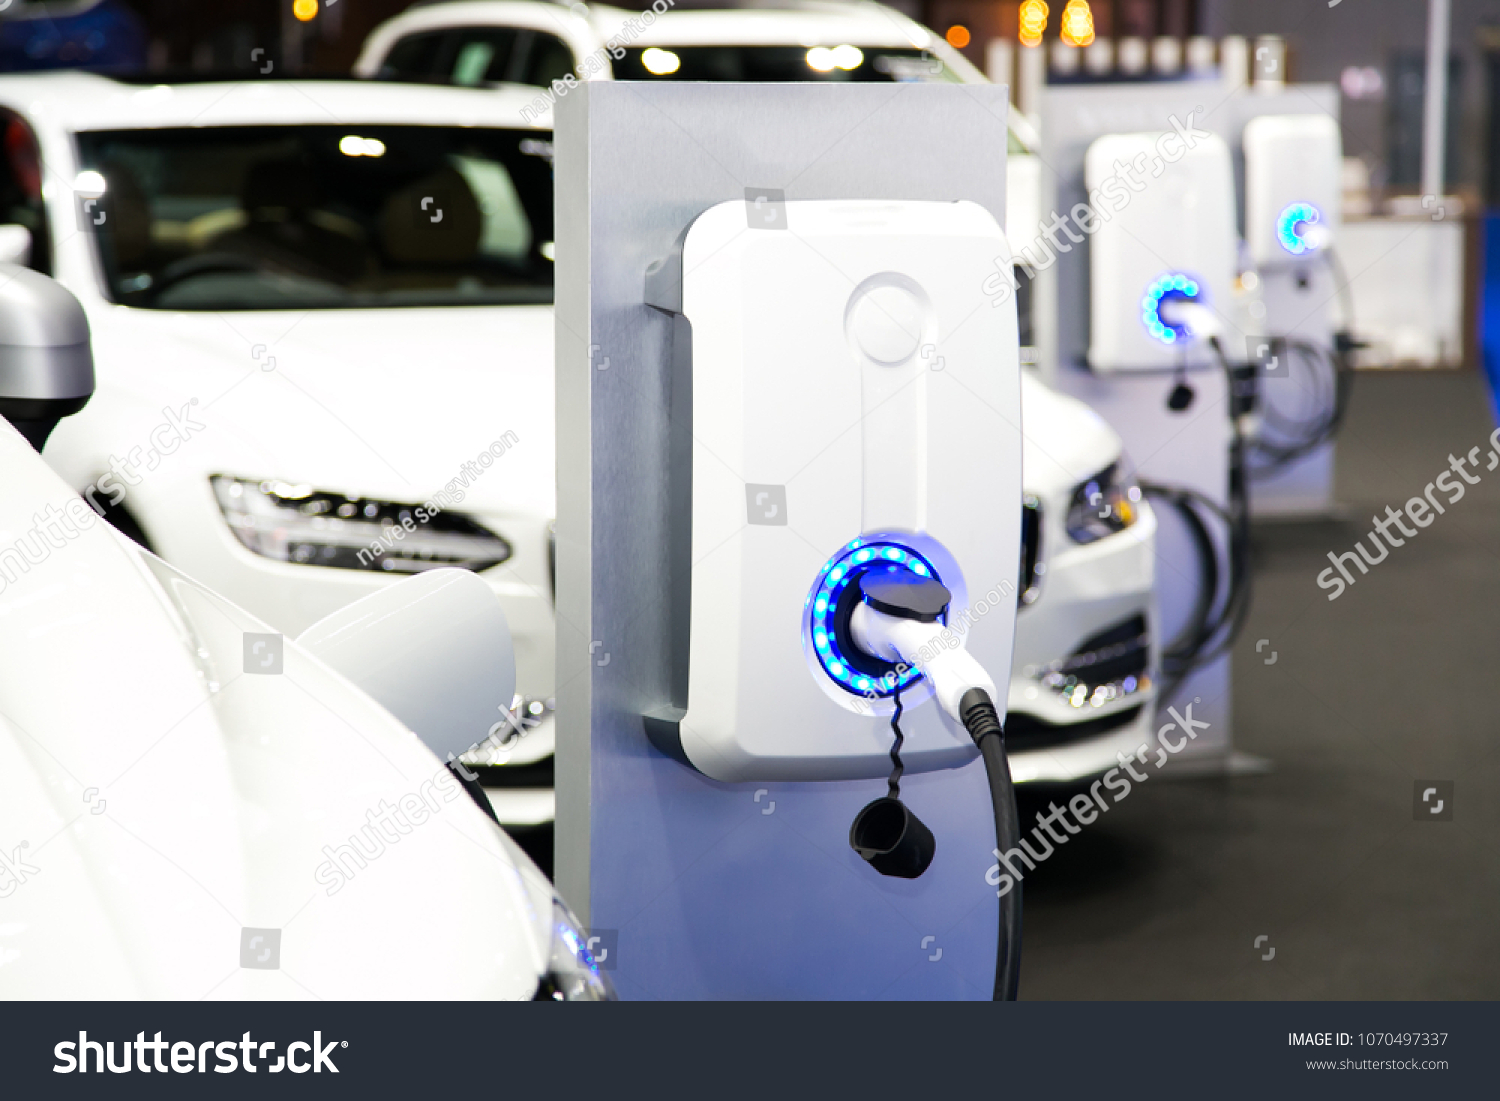 Power supply for electric car charging. Electric car charging station #1070497337